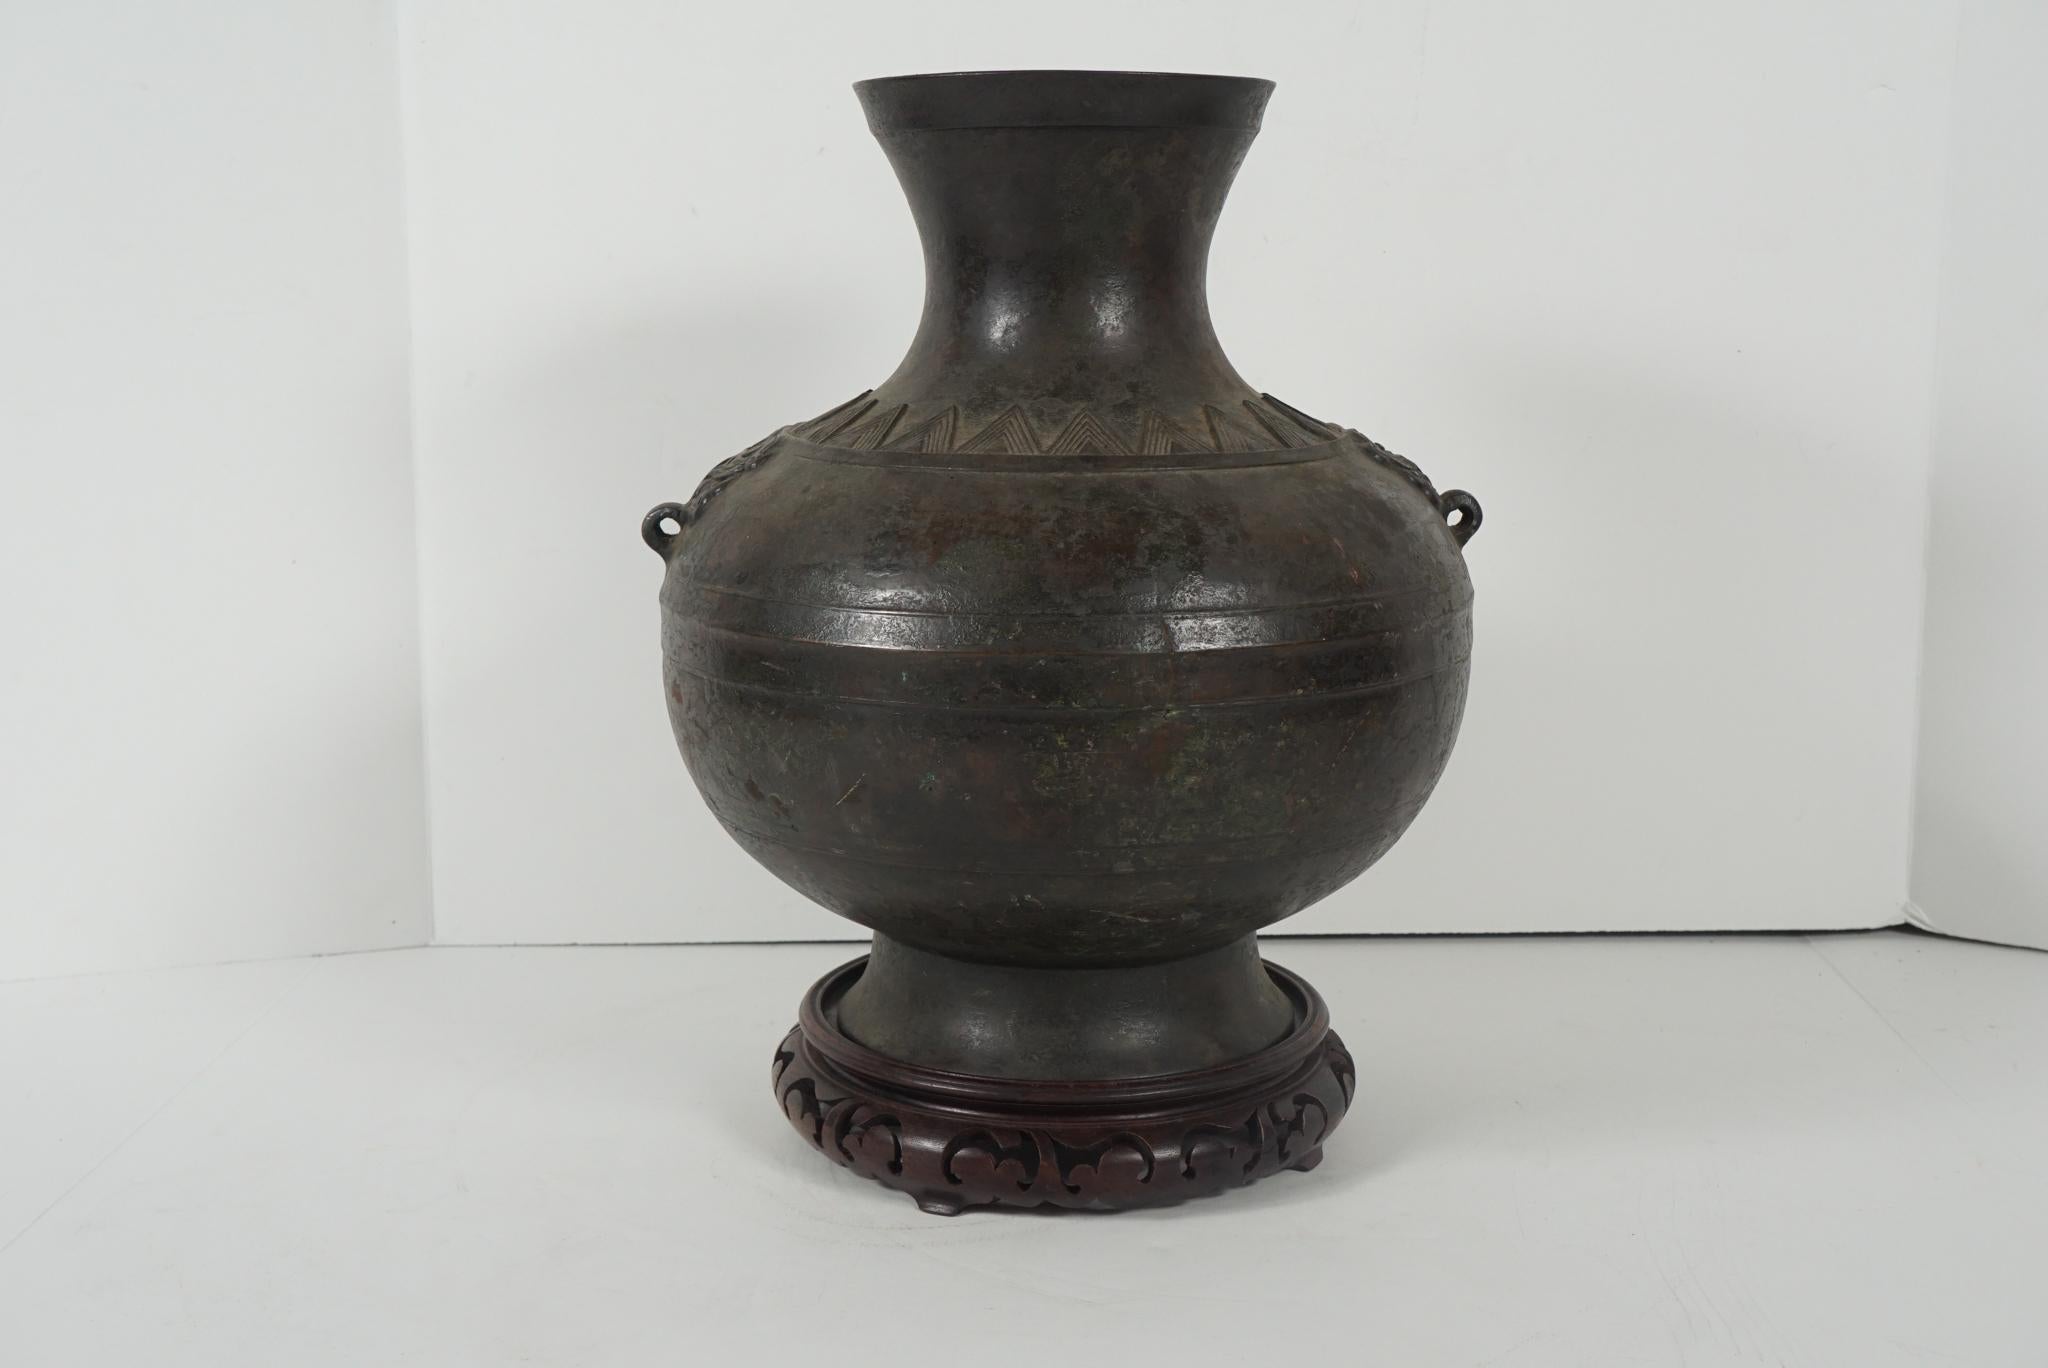 This fine old urn cast as an honorific nod to the ancient past of China was made circa 1600-1650. The shape or Hue was a common and well-represented form in the Han dynasty in pottery and bronze. This urn shows thin casting to the walls with